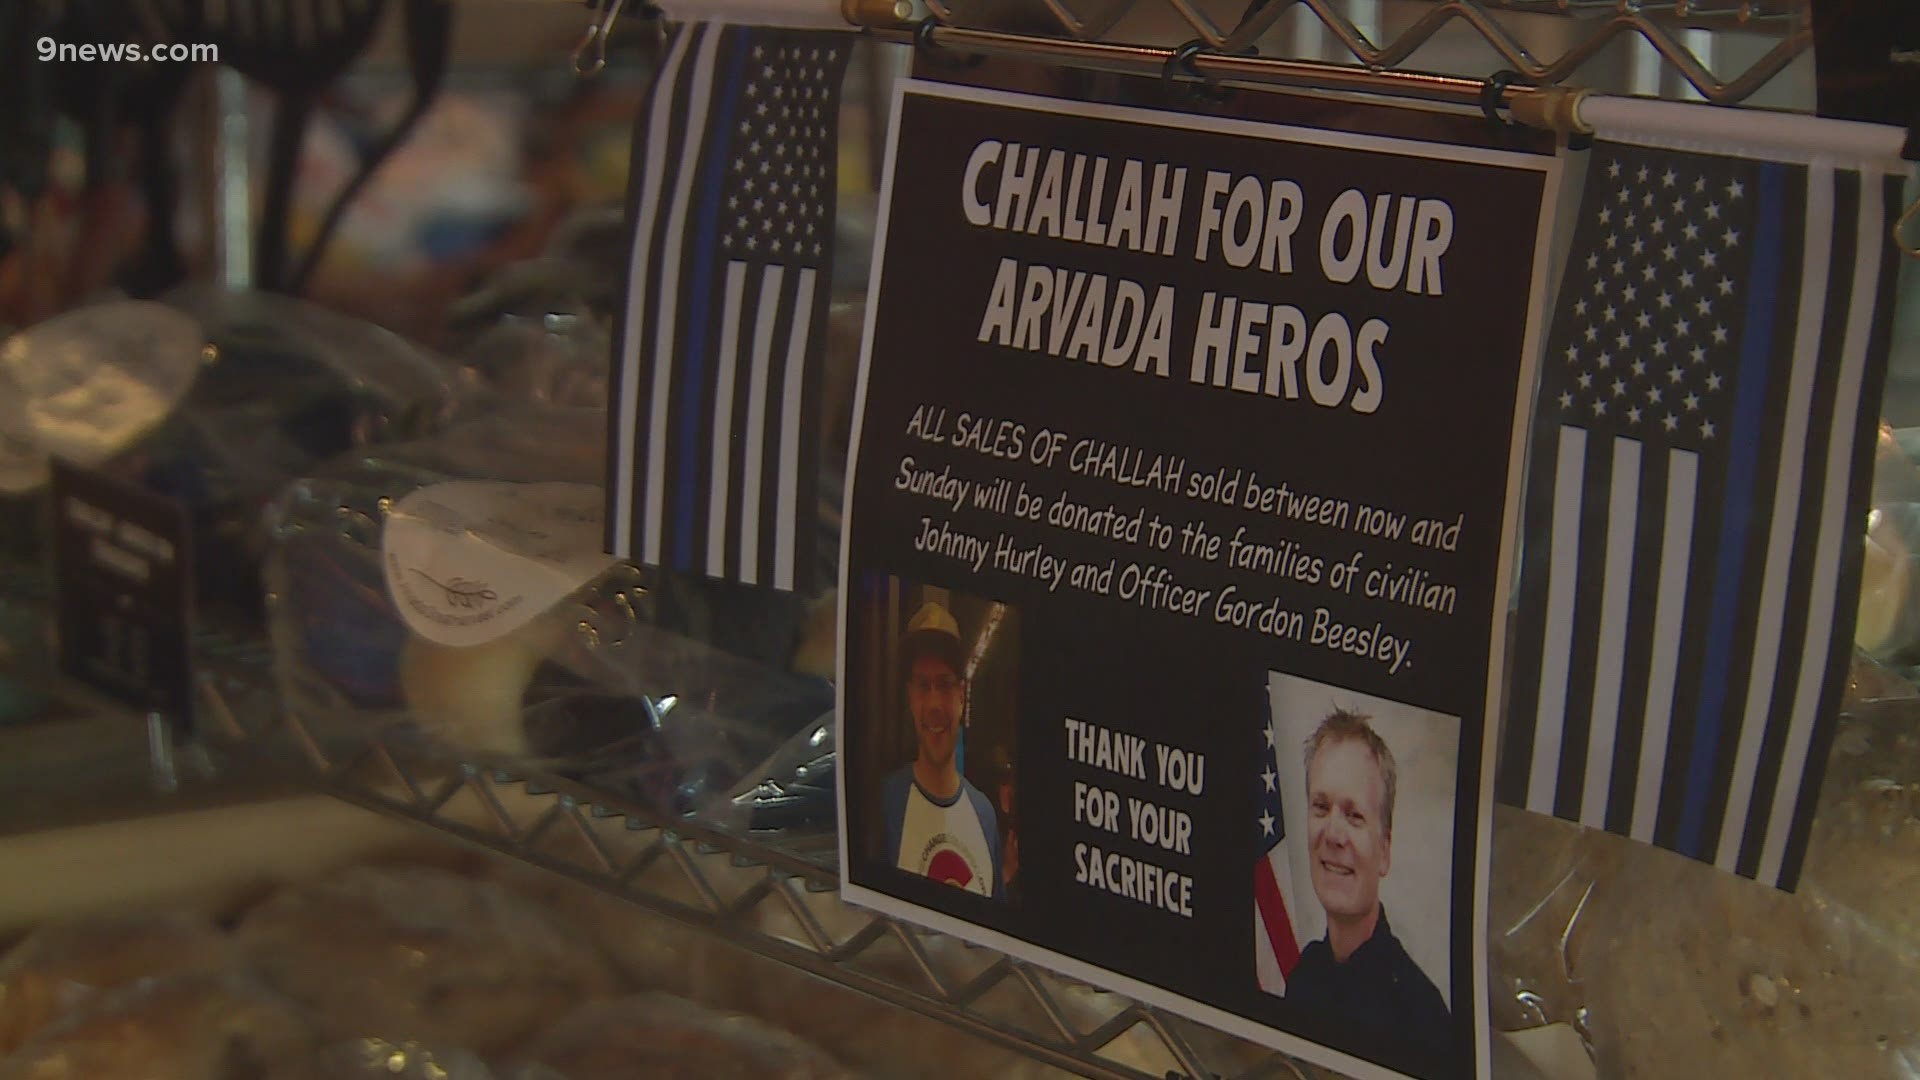 Great Harvest Bread Co. in Arvada is donating proceeds from challah bread sales directly to the families of Johnny Hurley and Officer Gordon Beesley.